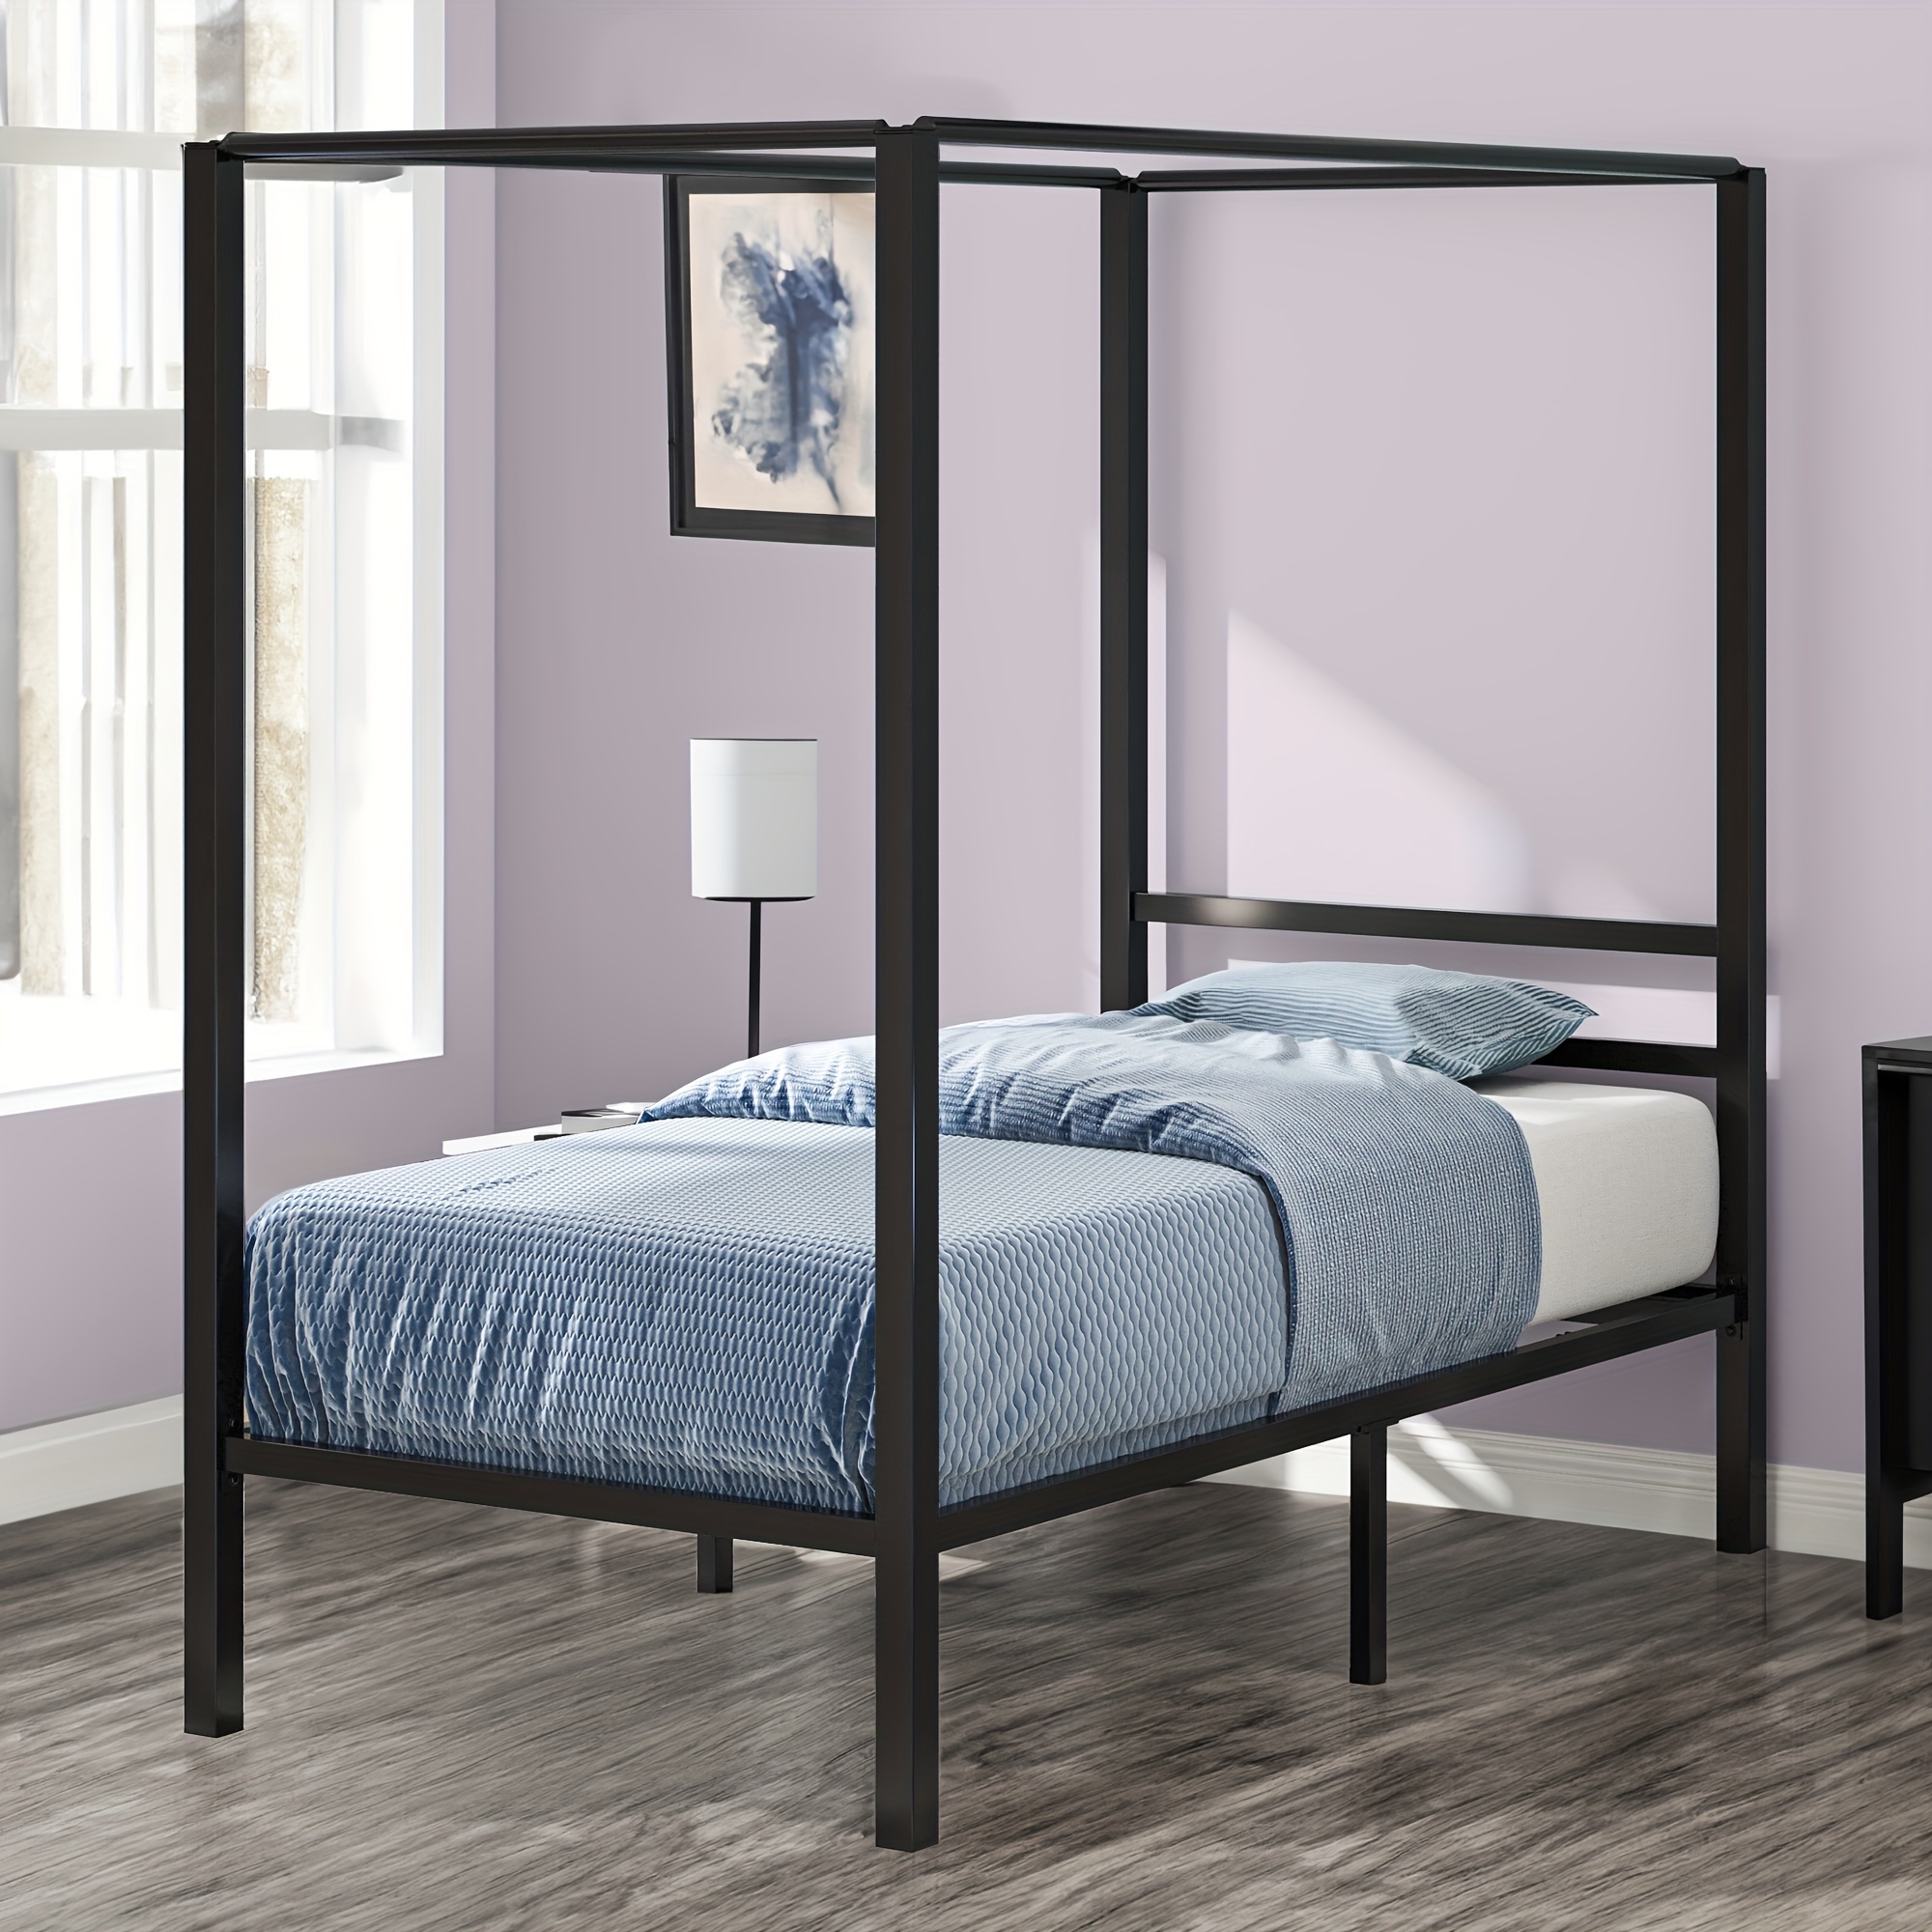 

Dwvo Metal 4 Posters Canopy Bed Frame 14 Inch Platform With Built-in Headboard Strong Metal Slat Mattress Support, No Box Spring Needed, Black, Twin Size